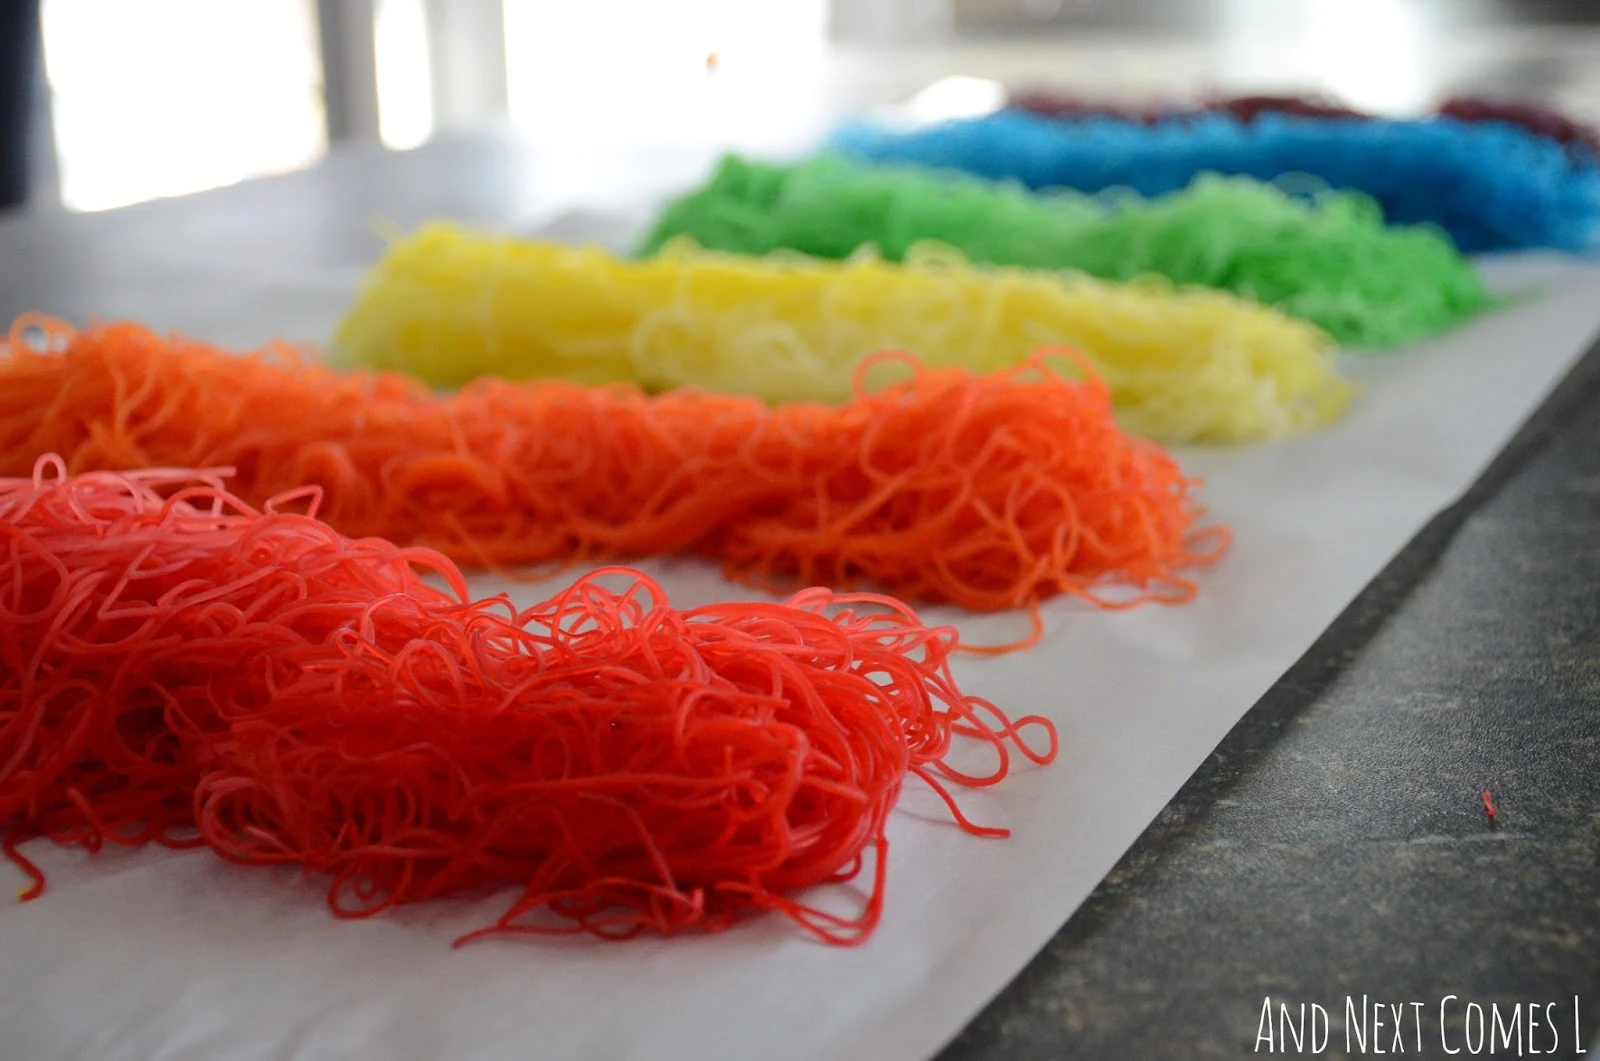 How to dye rice noodles for sensory play